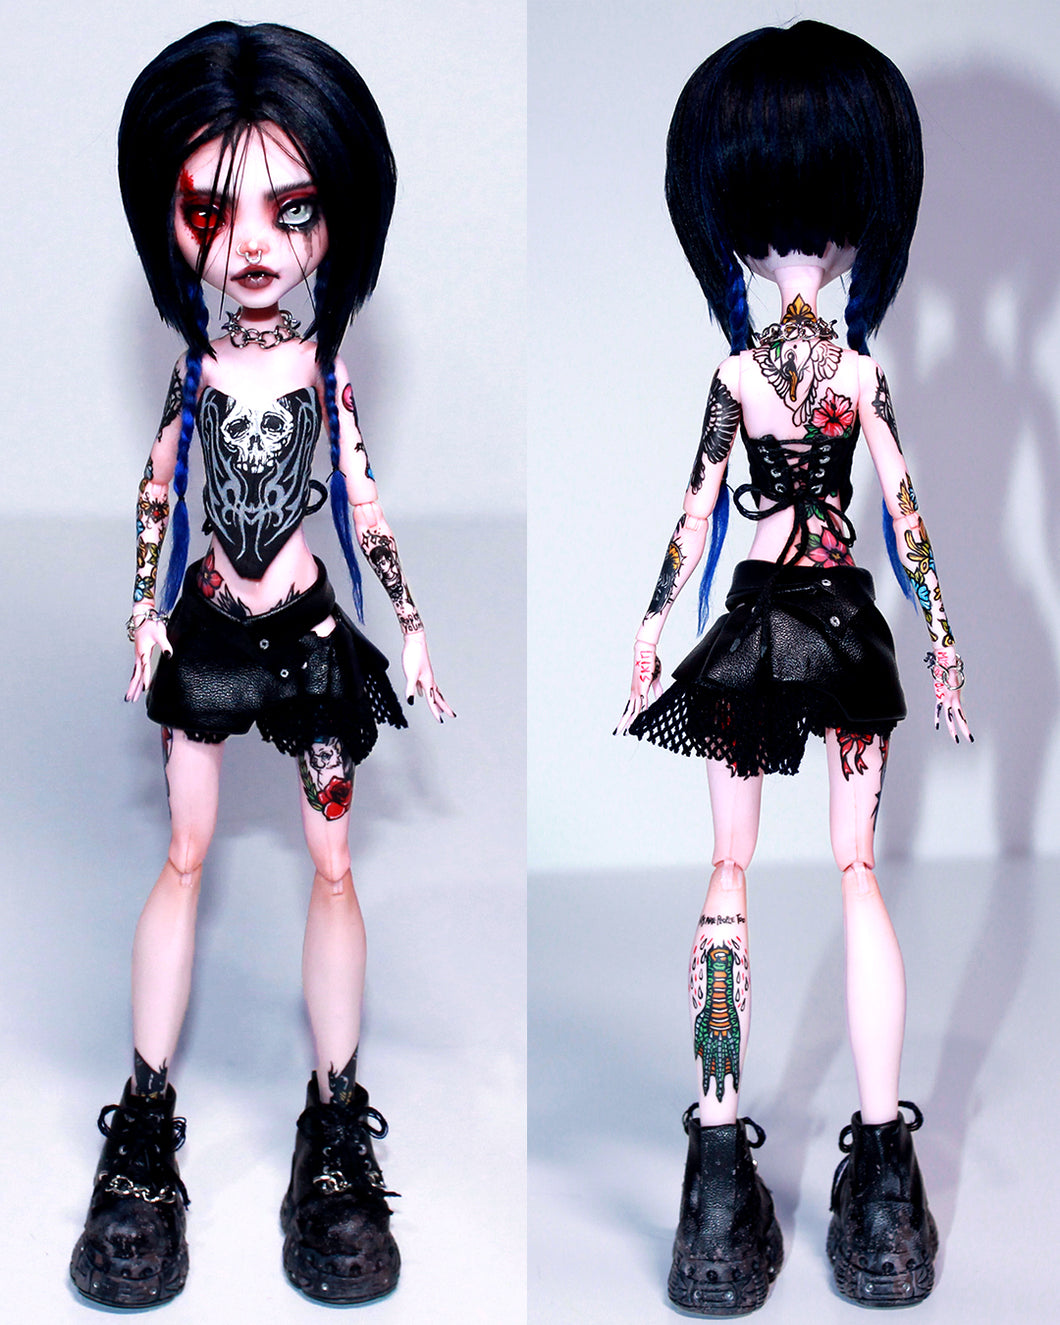 Limited Mystery Design Doll (PRE-ORDER) (ONLY 2 DOLLS IN EXISTENCE)